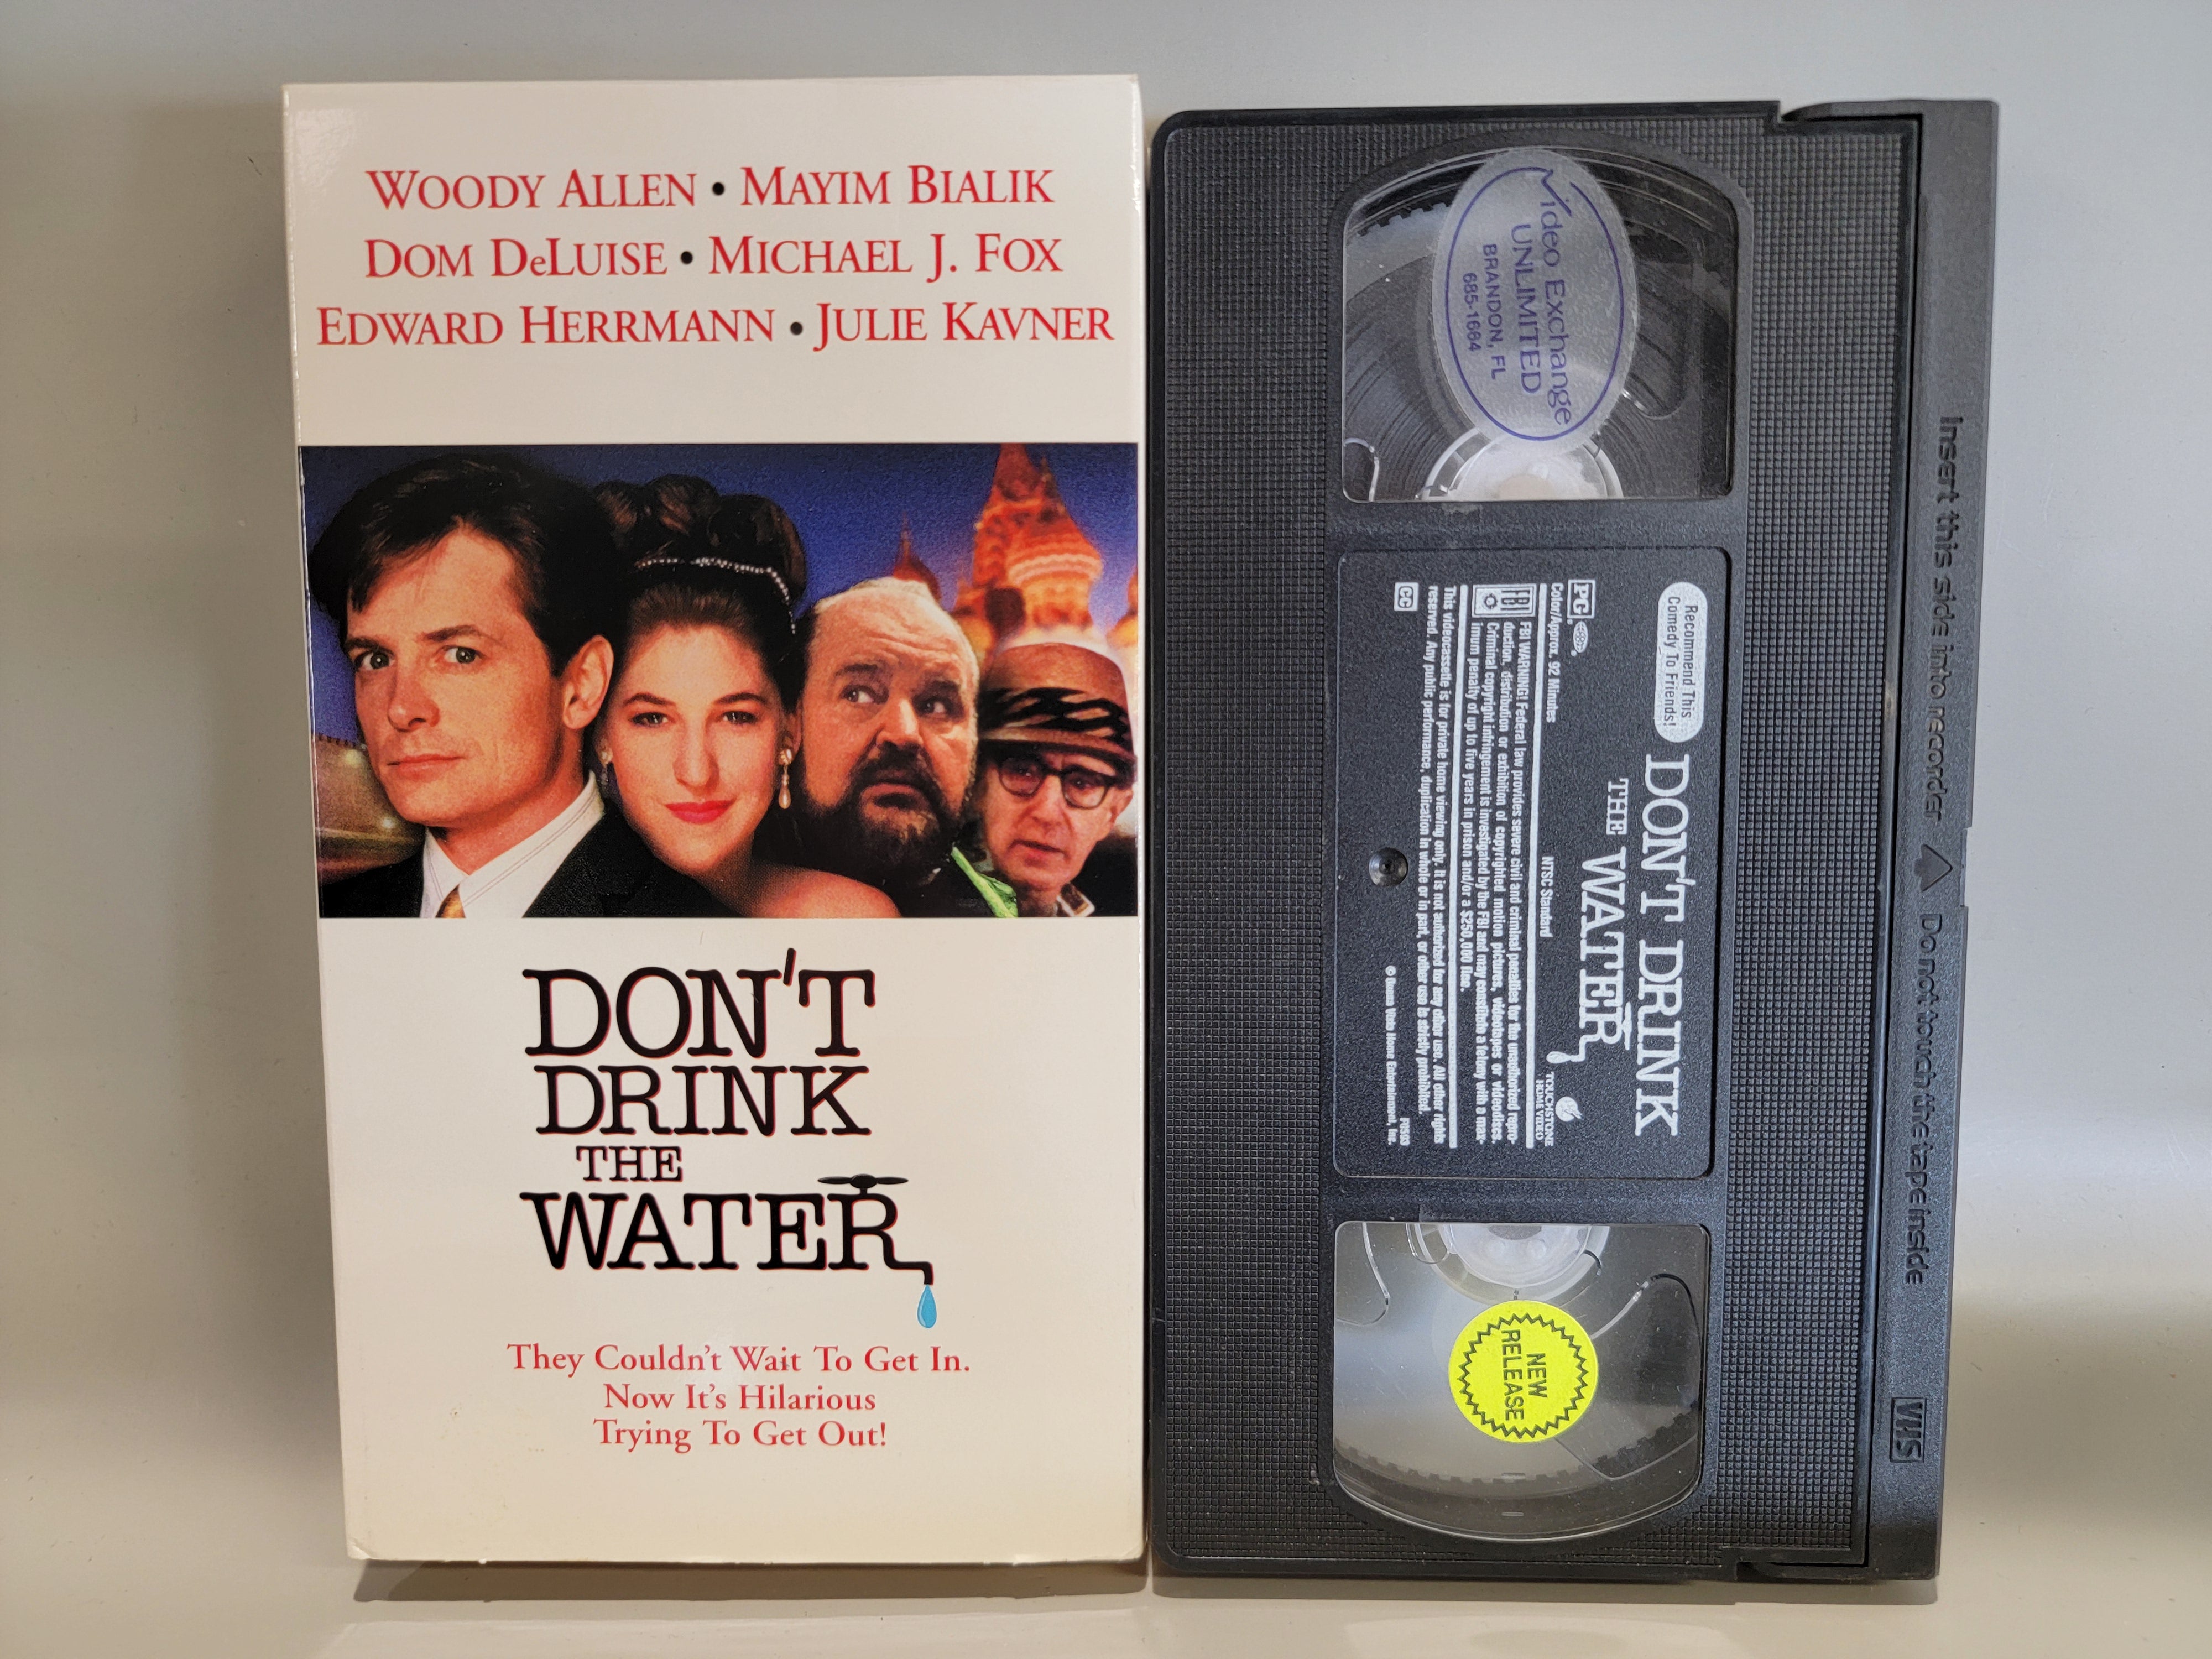 DON'T DRINK THE WATER VHS [USED]